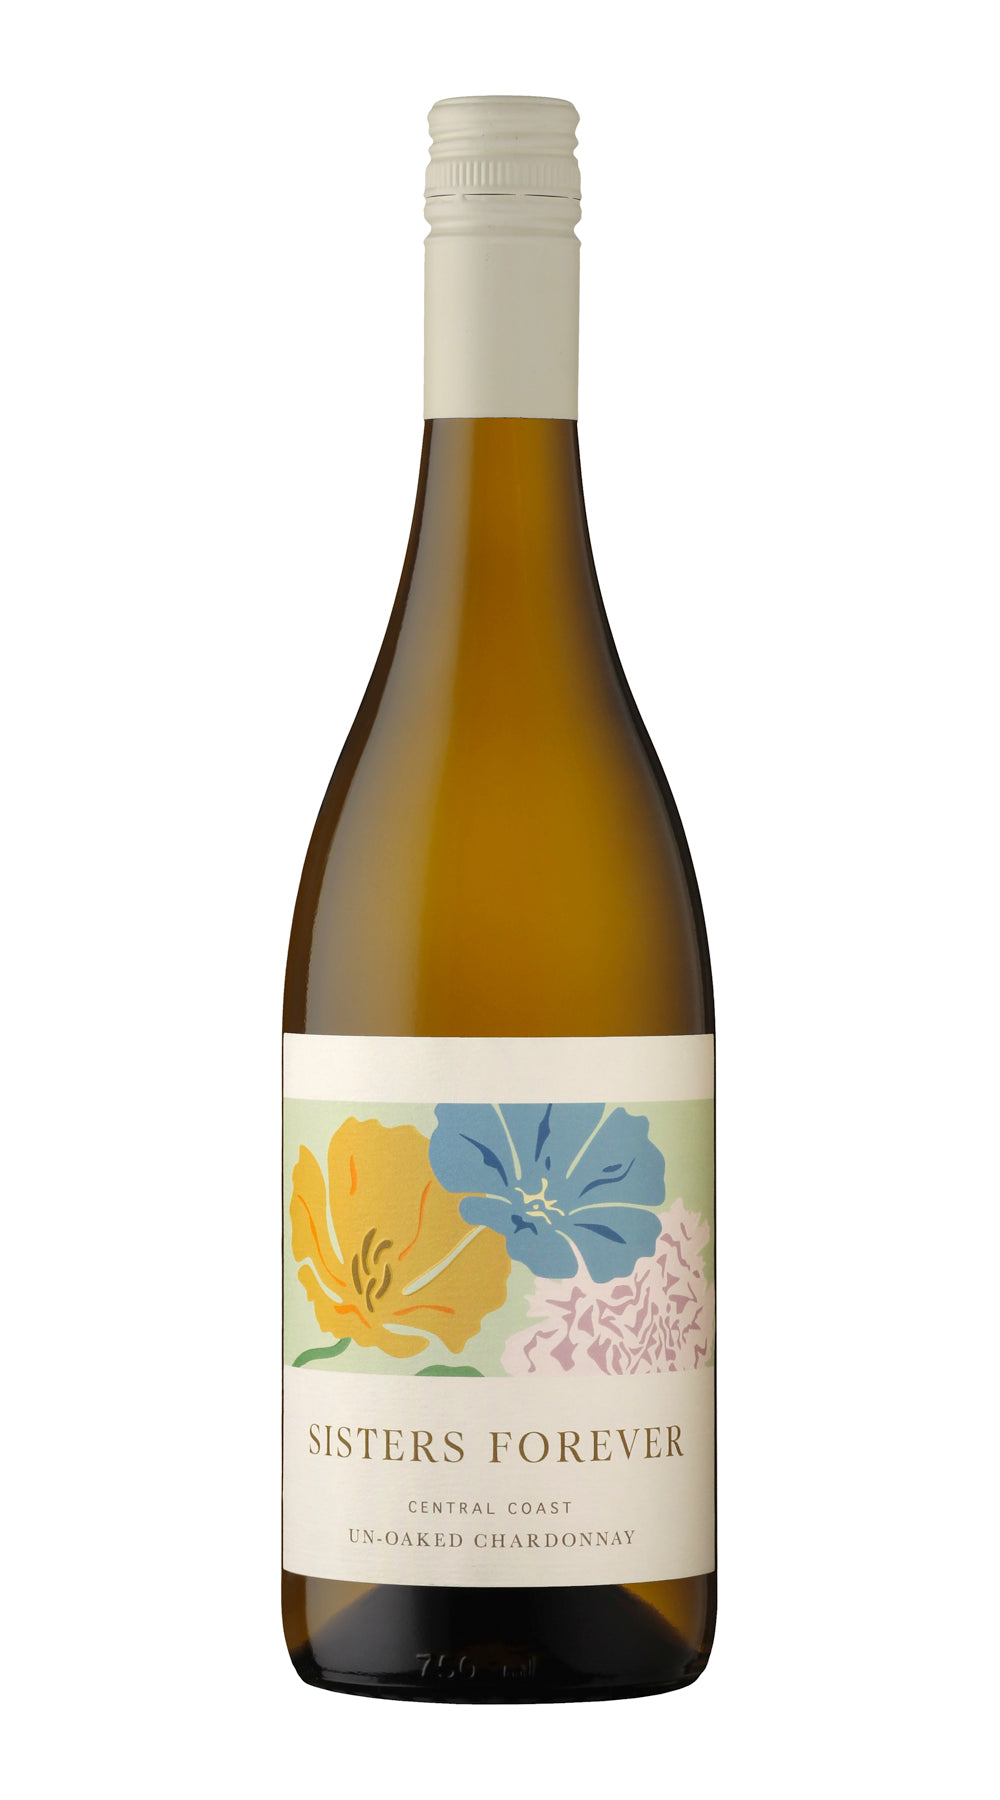 Donati Unoaked Chardonnay 'Sisters Forever'